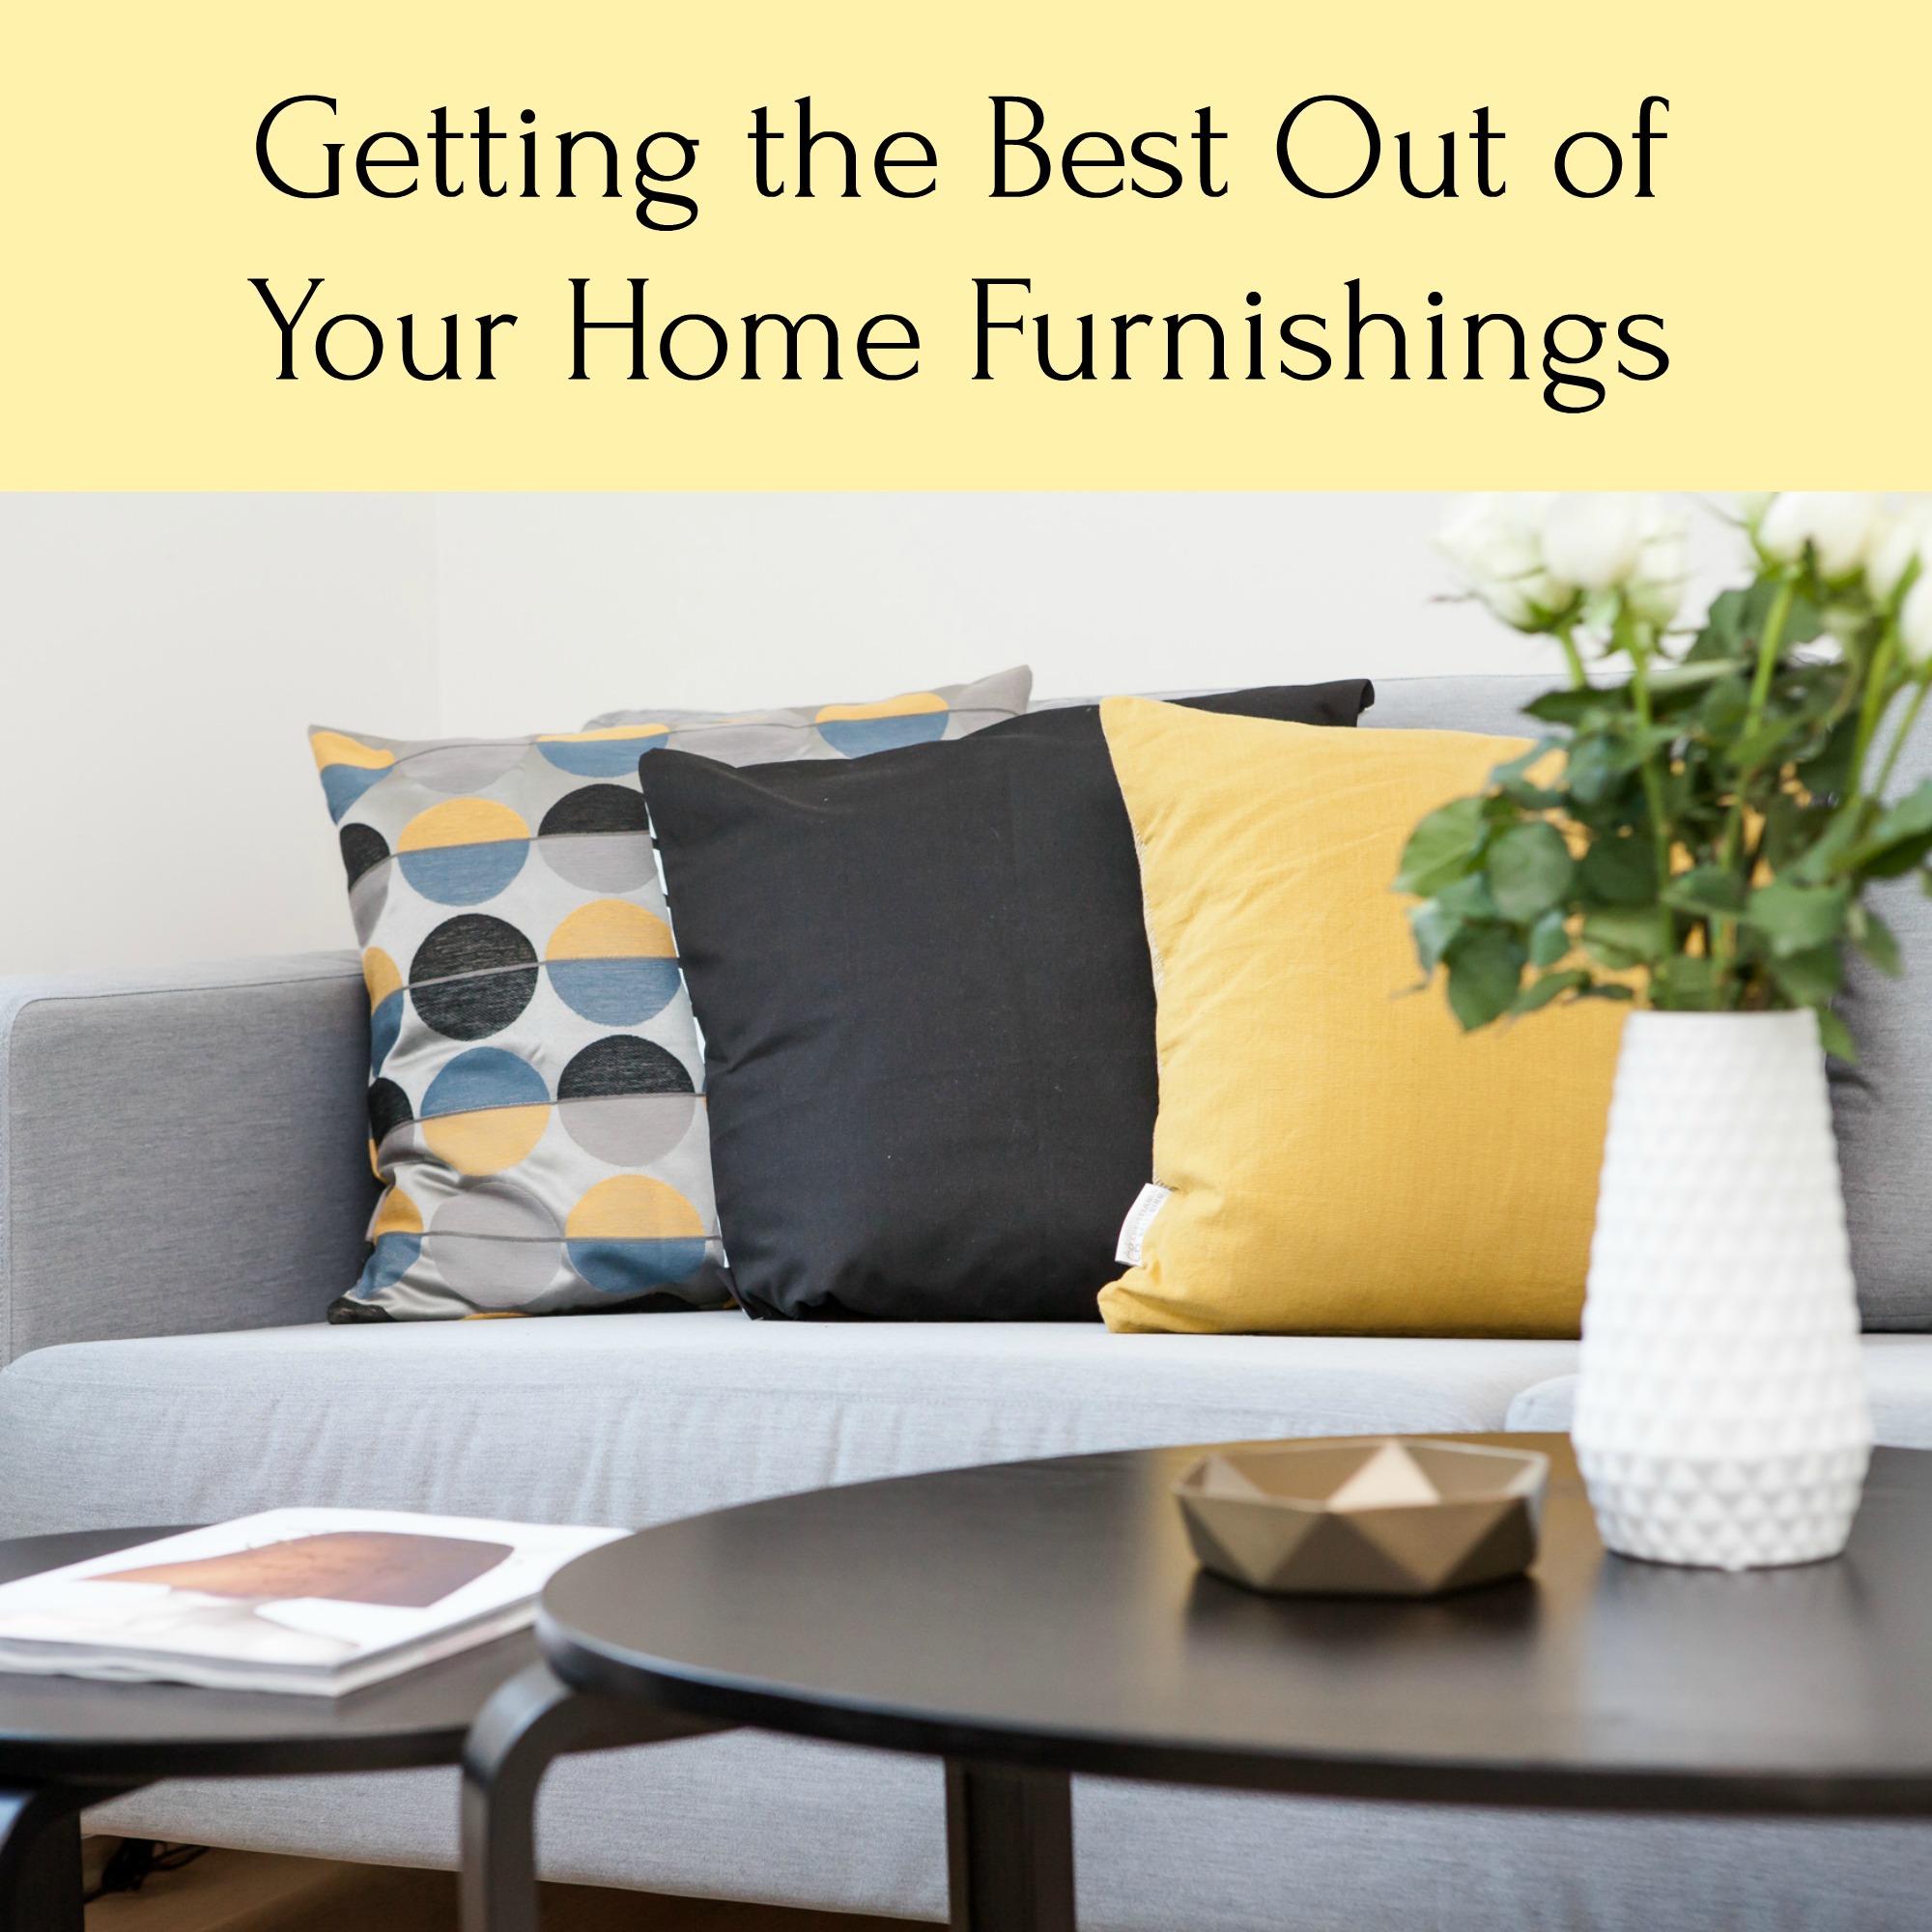 Getting the Best Out of Your Home Furnishings